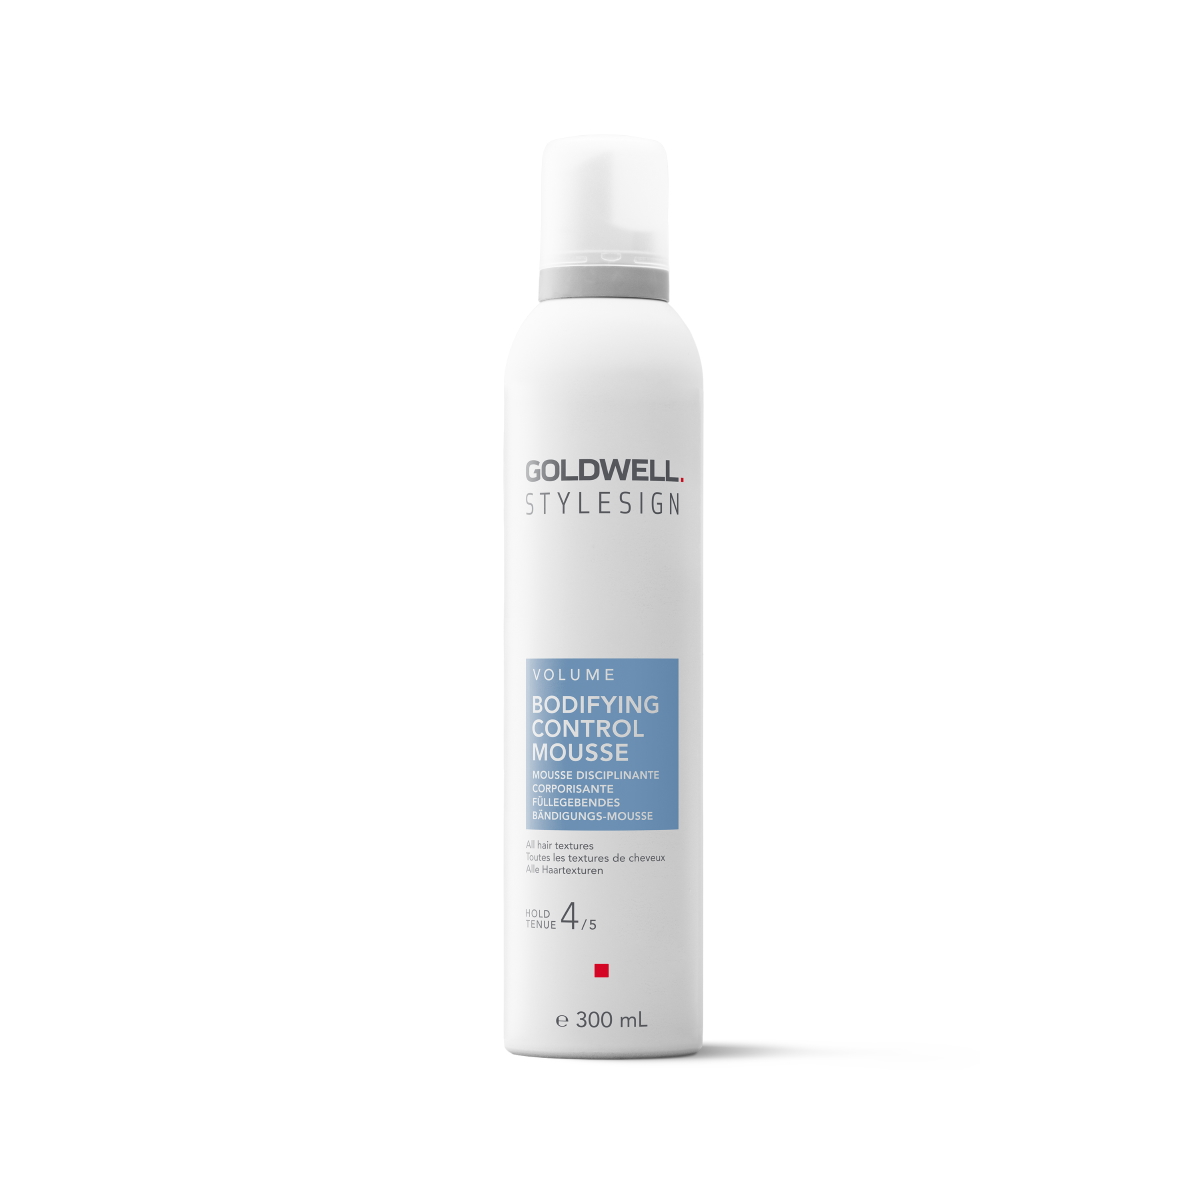 Goldwell Style Sign Volume Bodifying Control Mousse 500ml